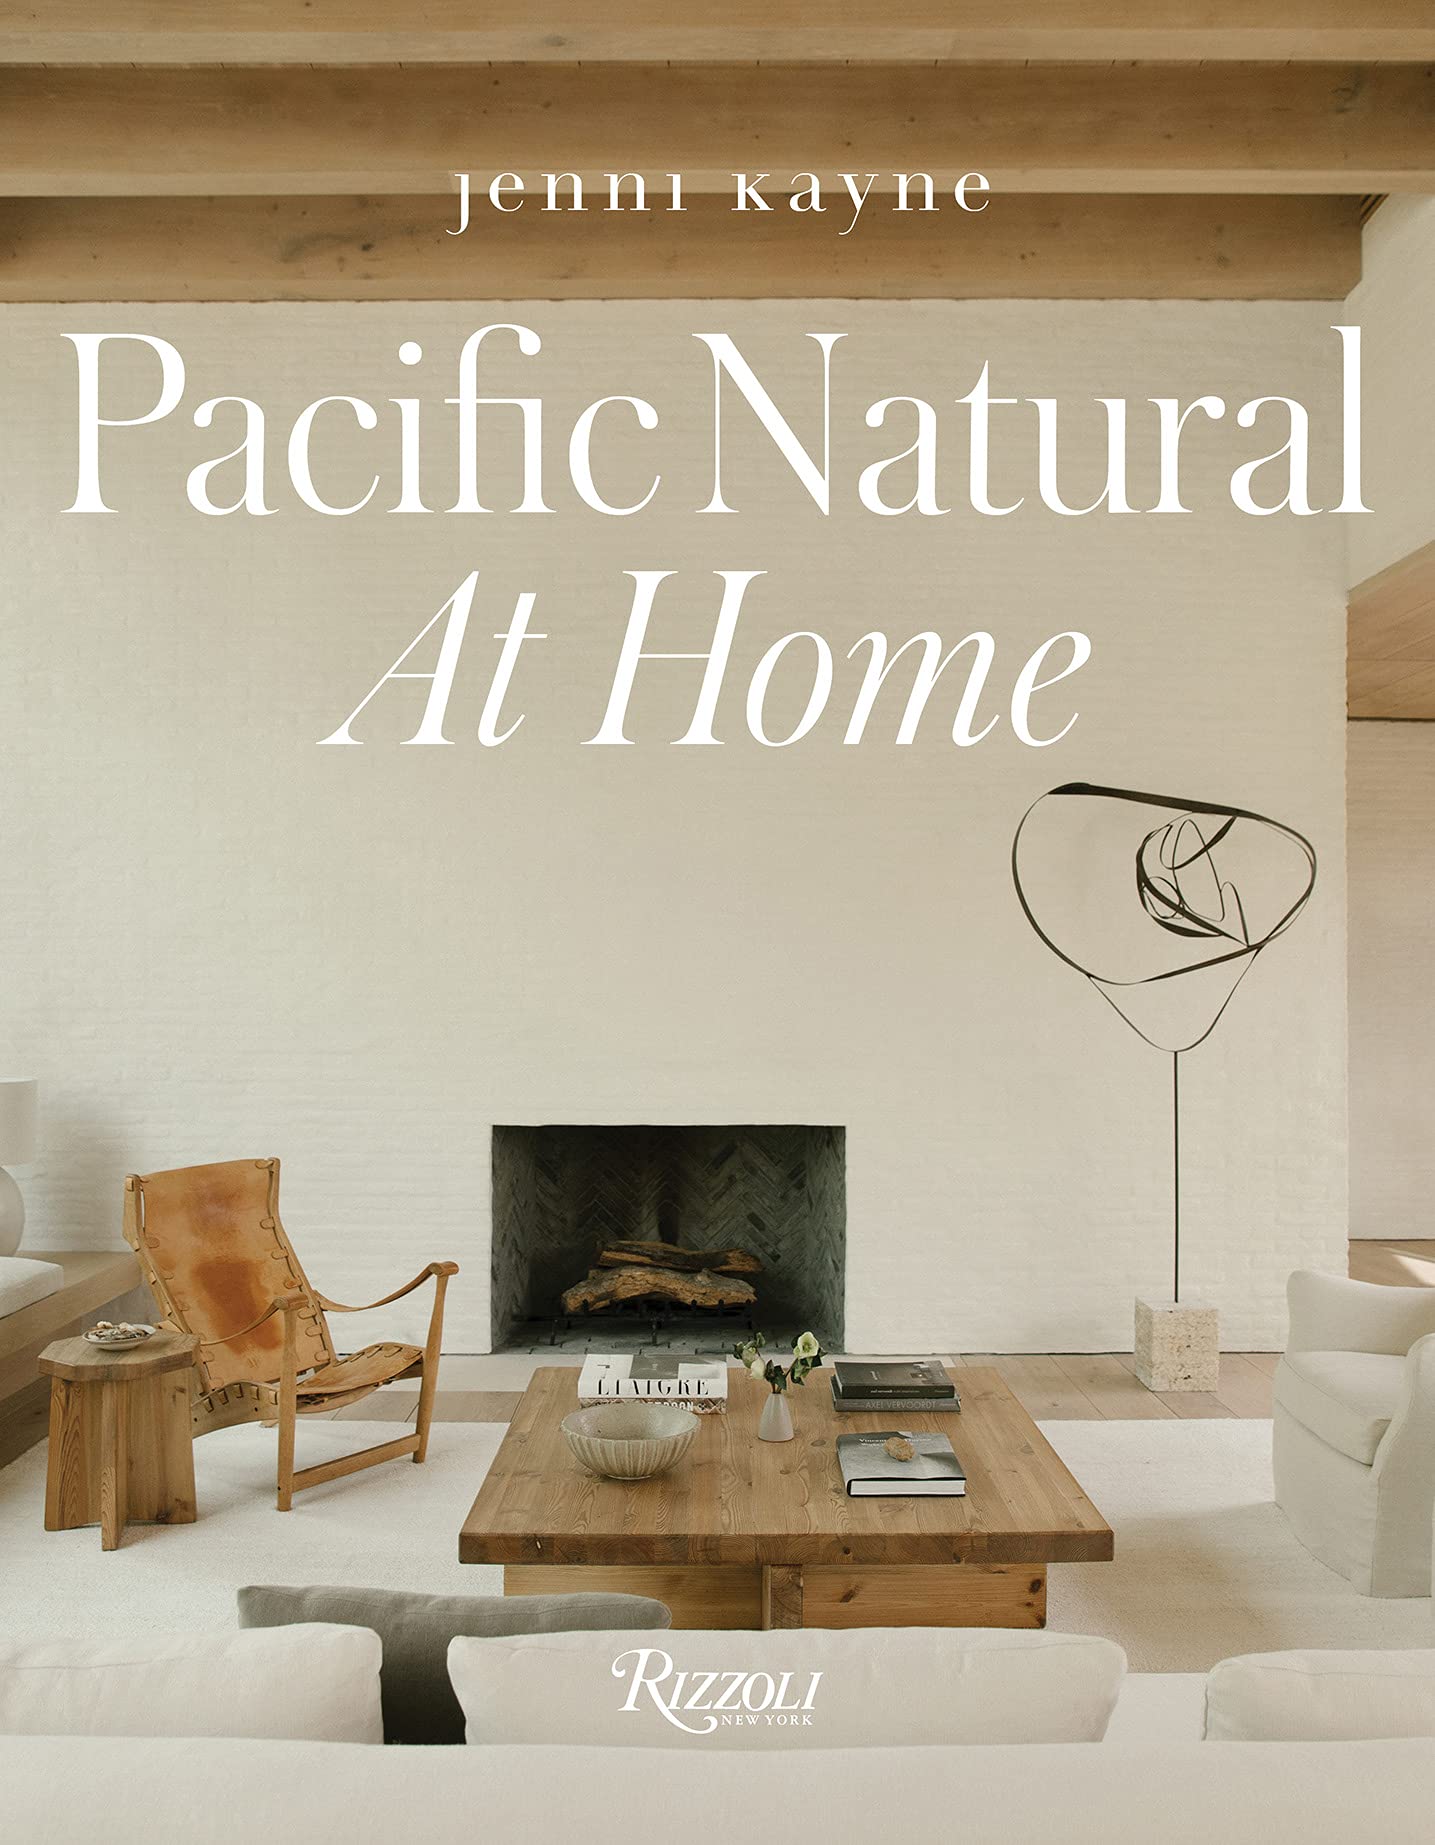 Pacific Natural at Home by Jennie Kayne - book cover